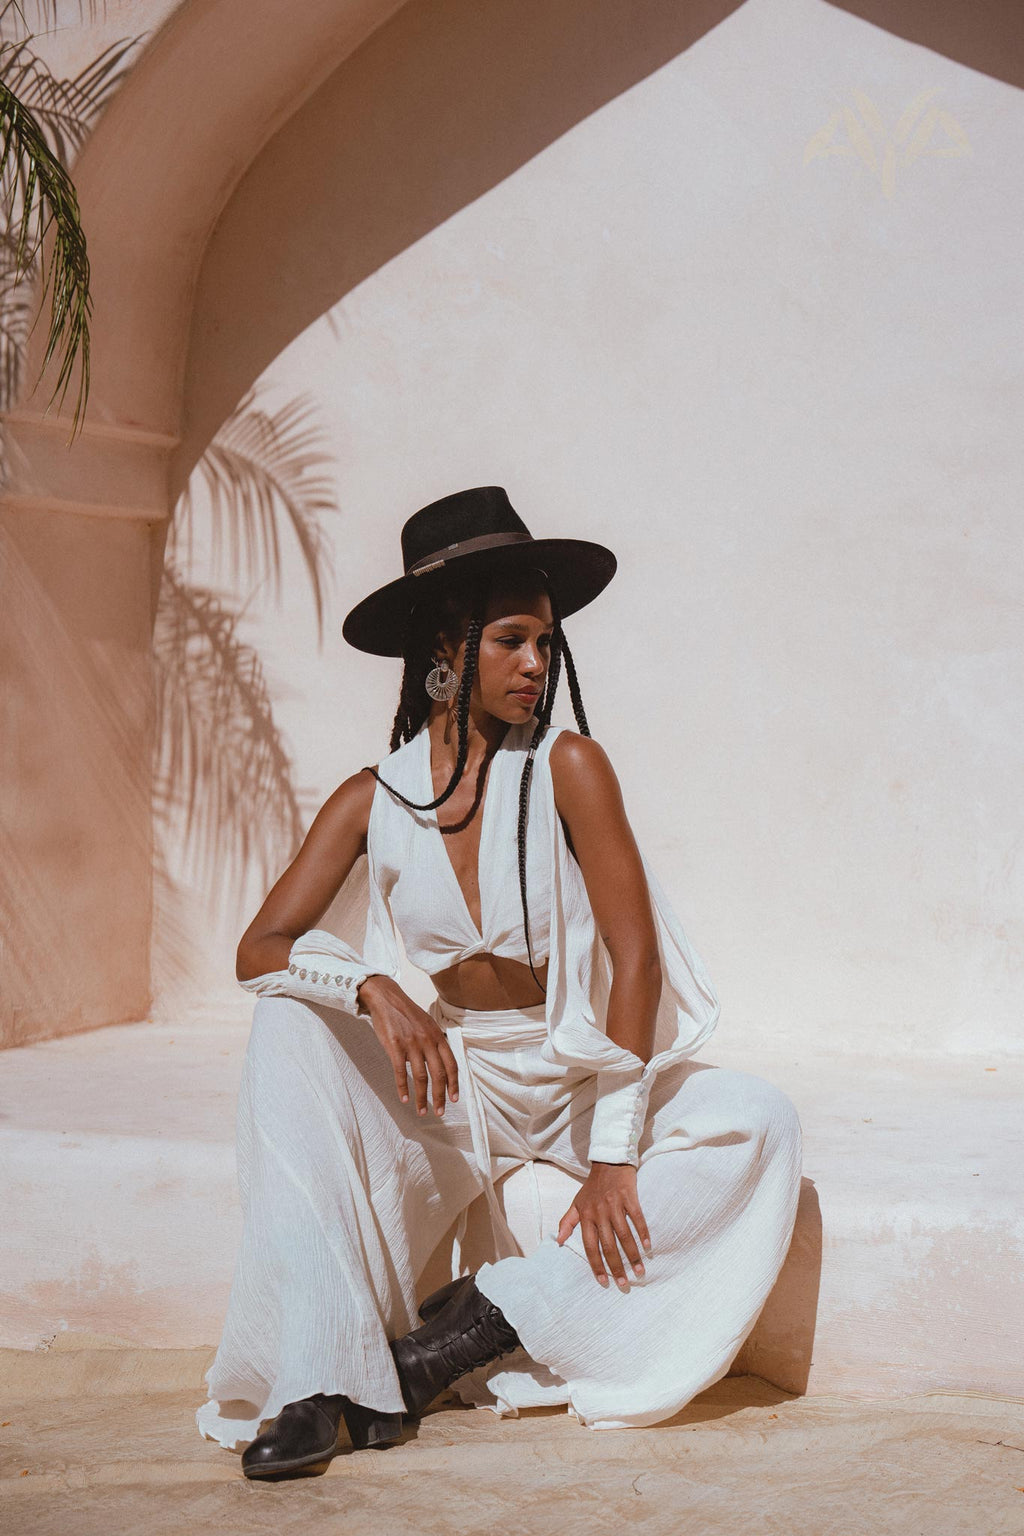 Get the Off-White Boho Set Top & Pants from Aya Sacred Wear for chic boho style. 